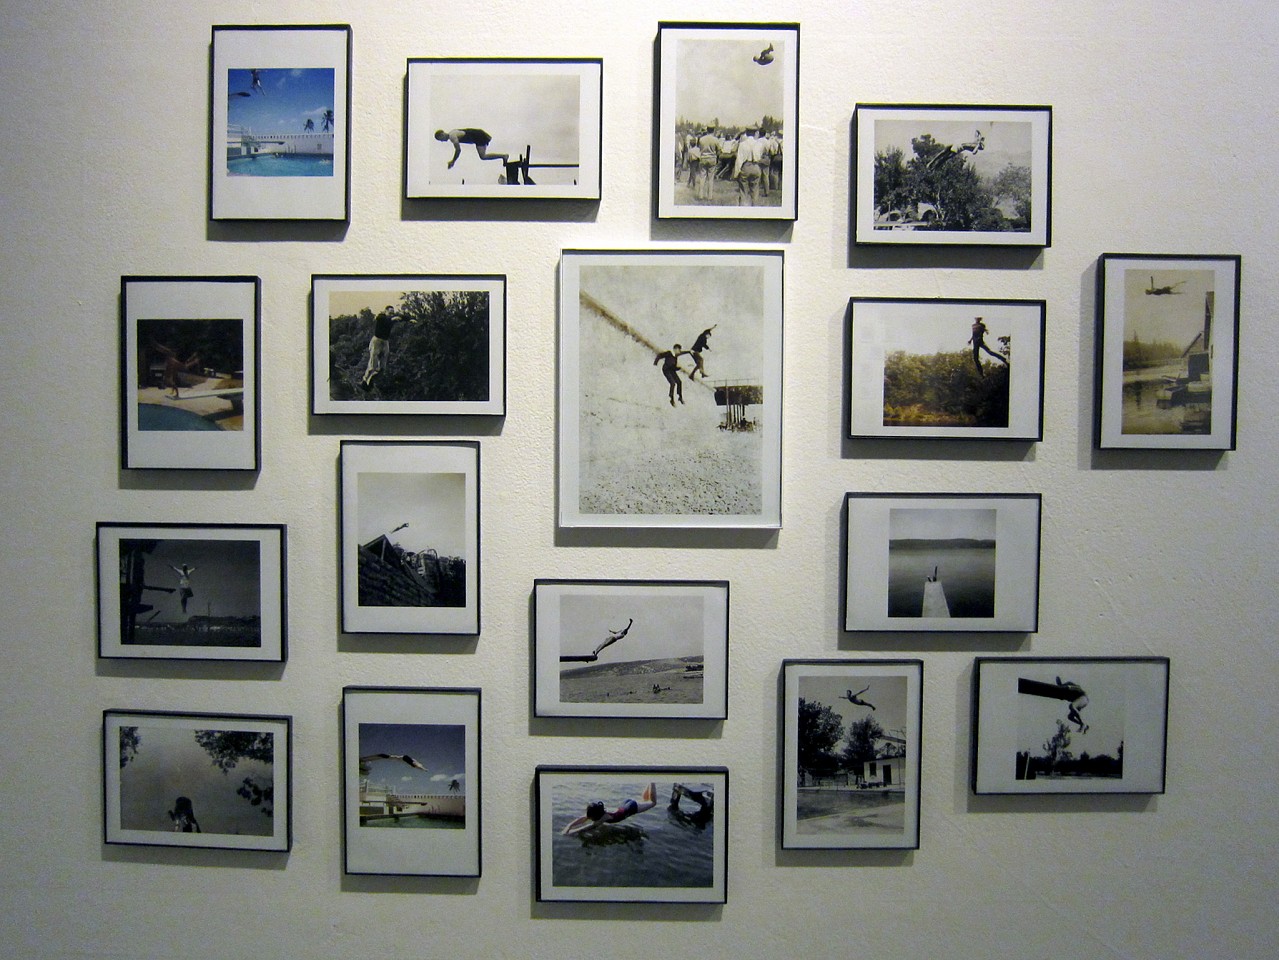 Oliver Wasow, Art and Culture Center of Hollywood, Florida (installation view detail)
Found photographs